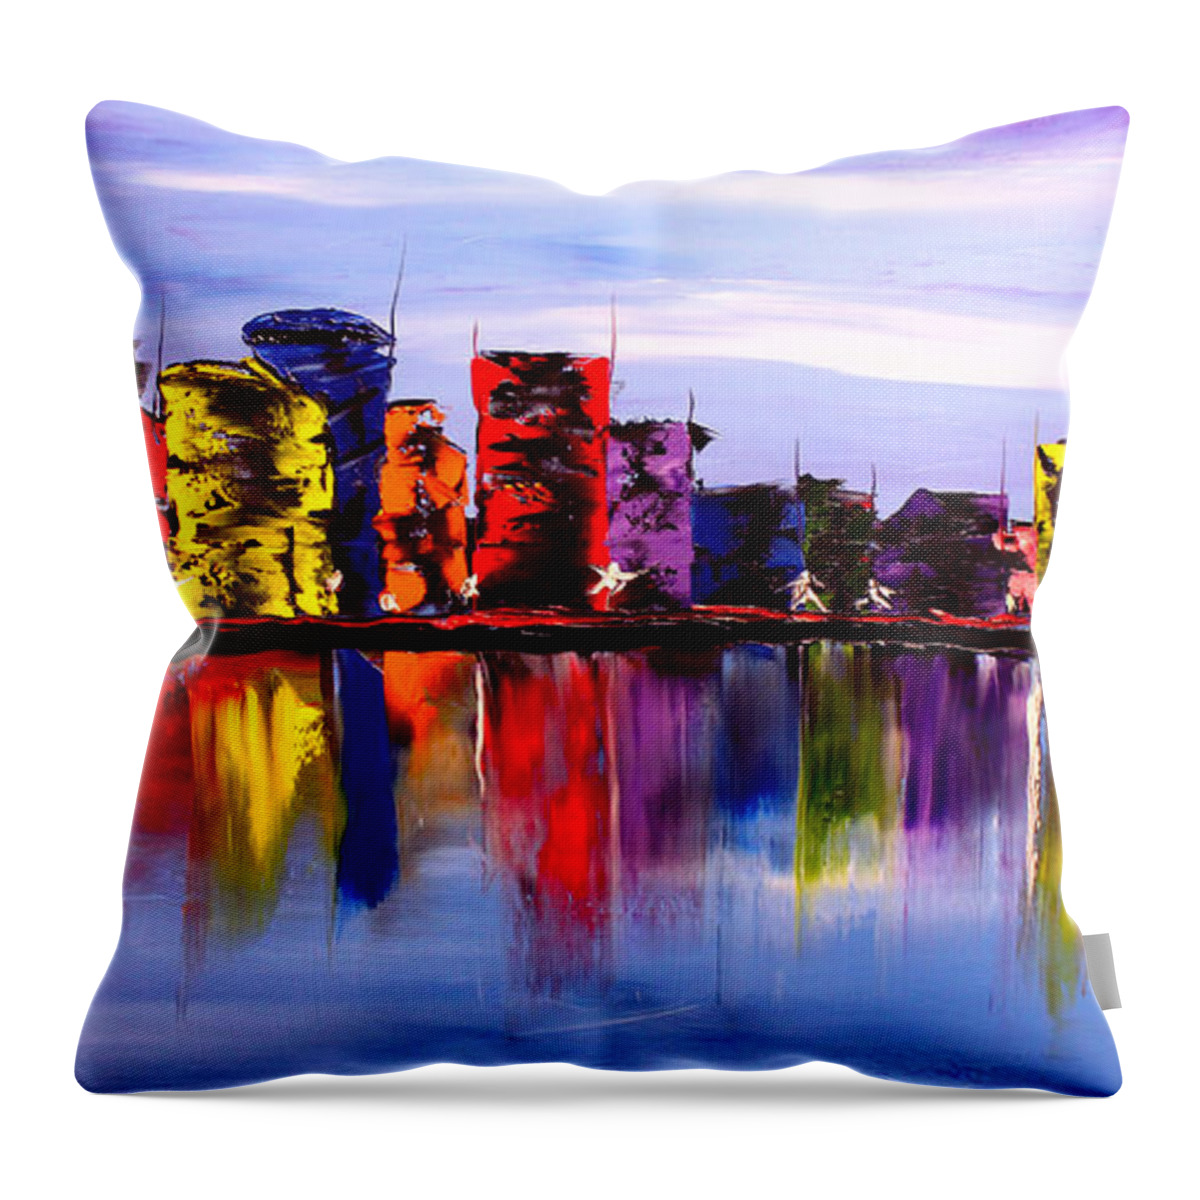  Throw Pillow featuring the painting Abstract World Of Portland #3 by James Dunbar